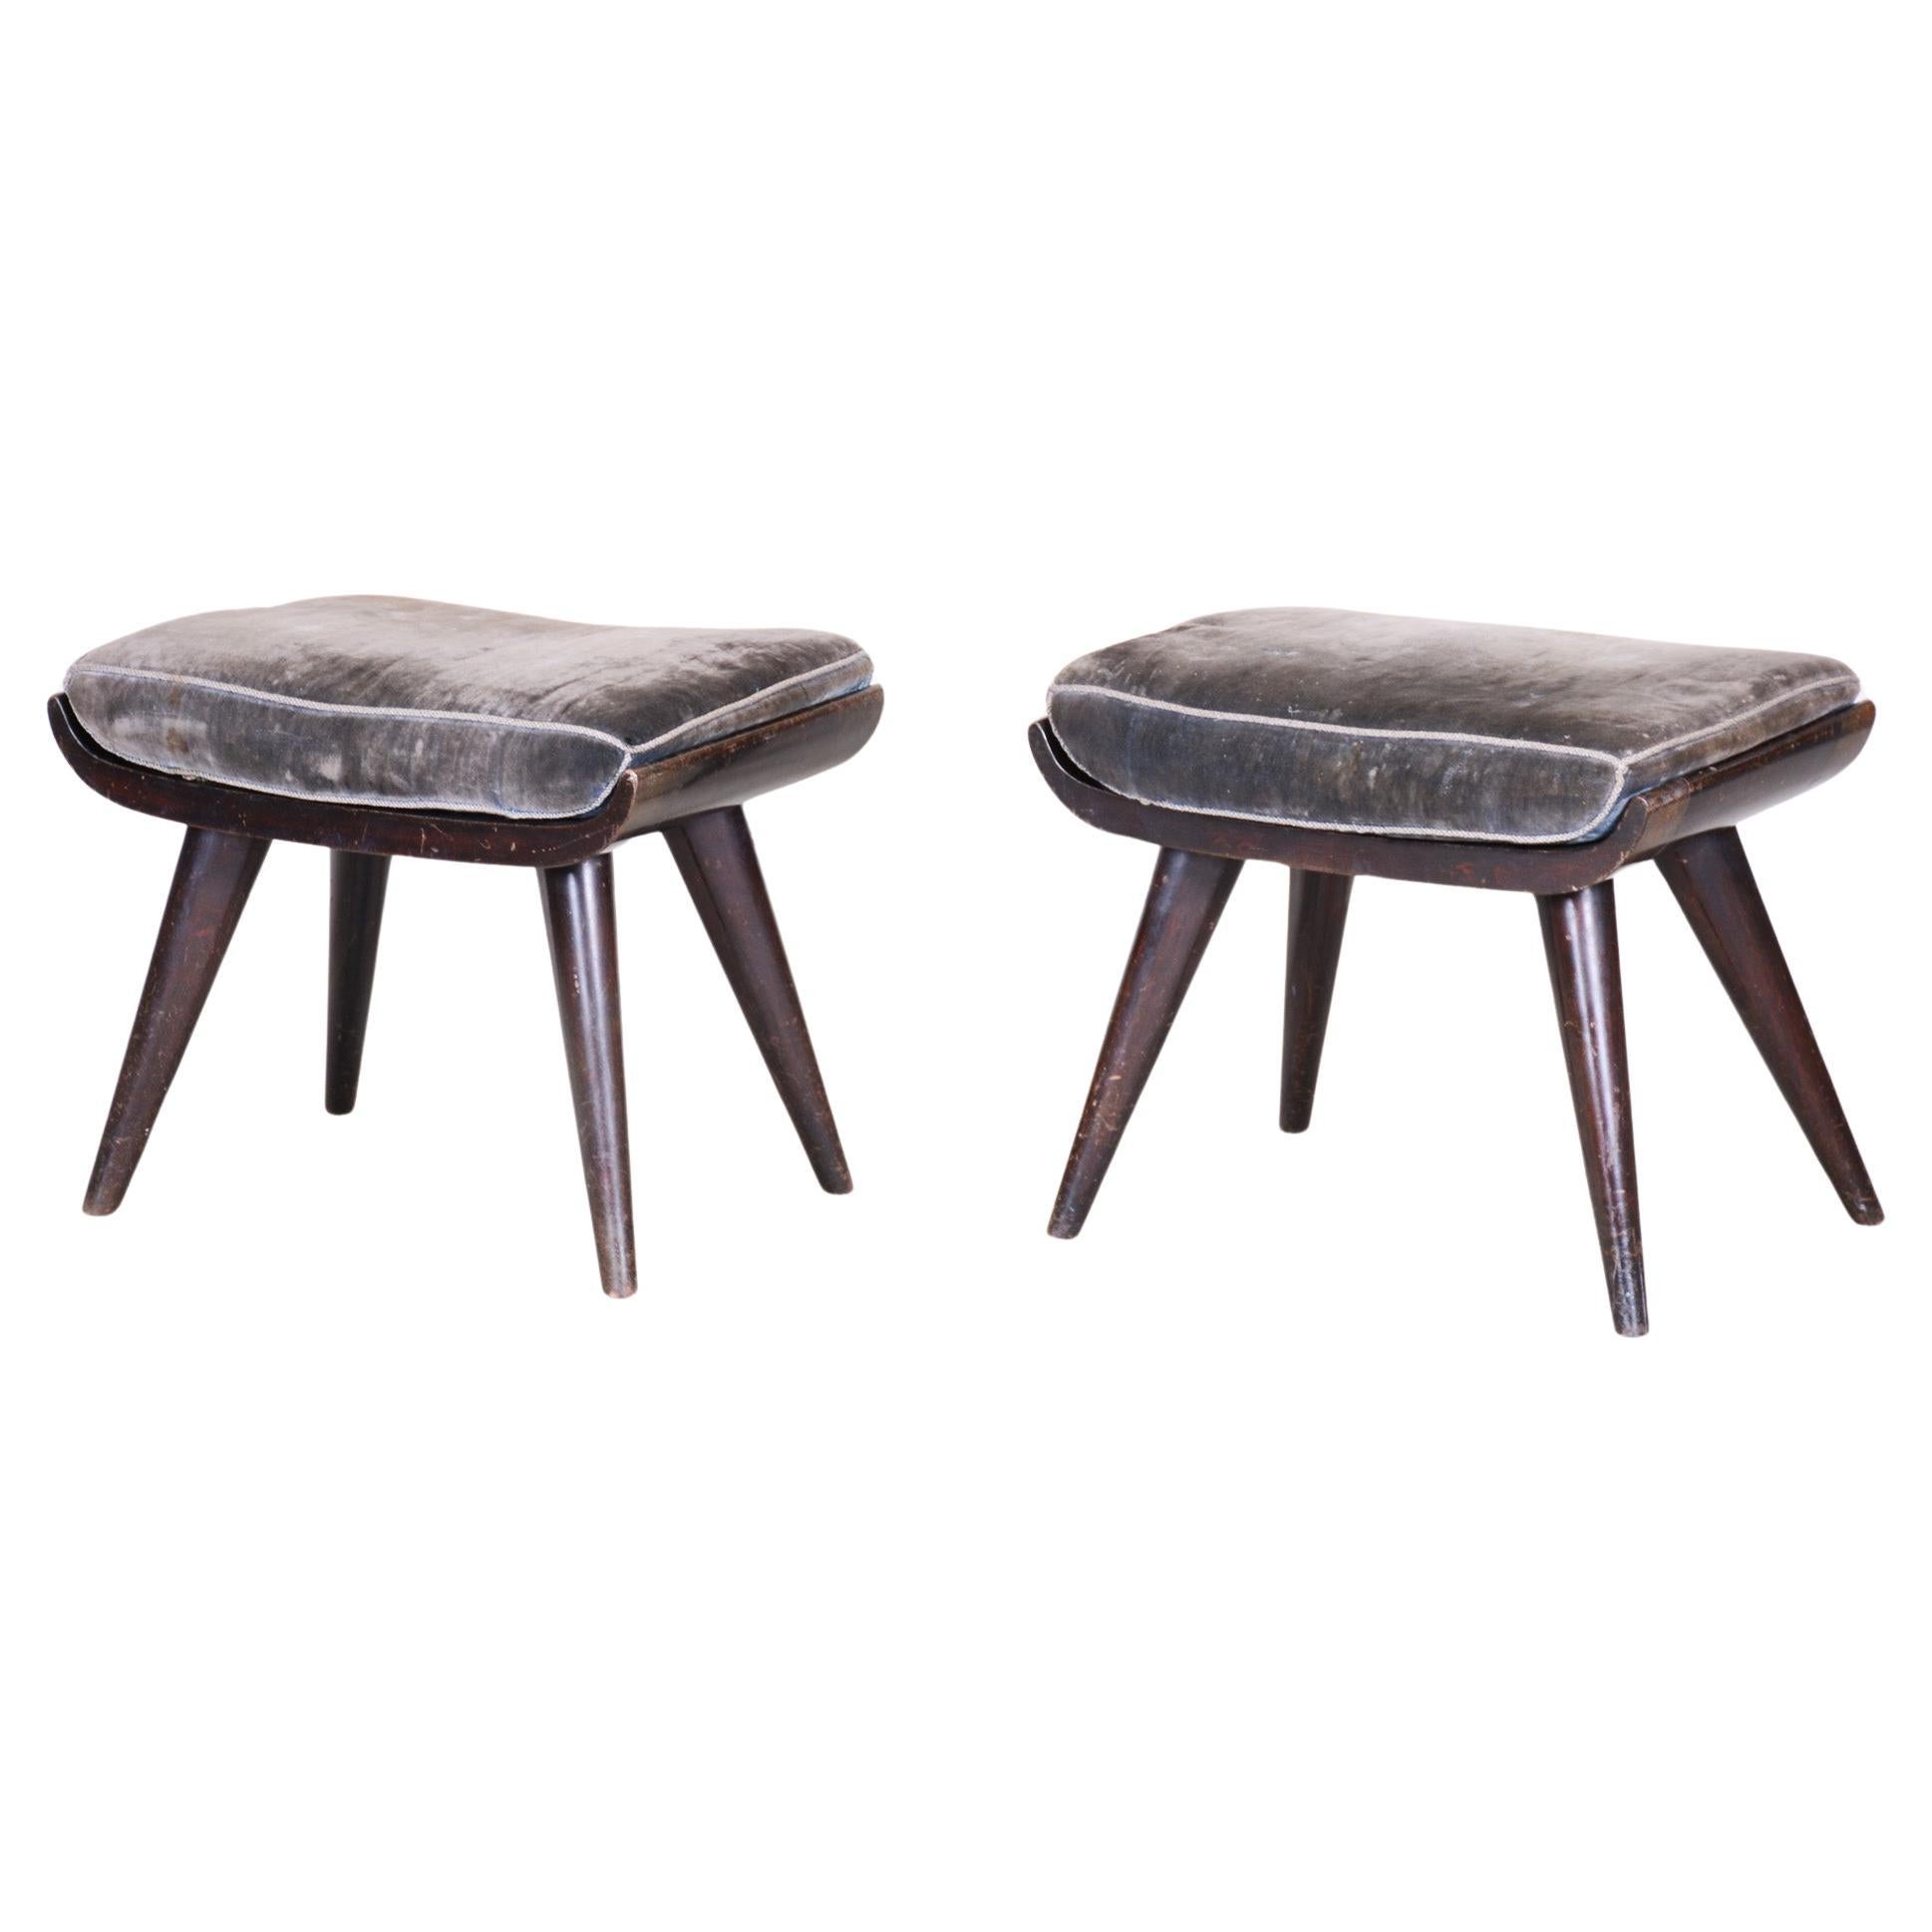 Pair of Art Deco Beech Stools, Original Preserved Condition, Czech, 1920s For Sale